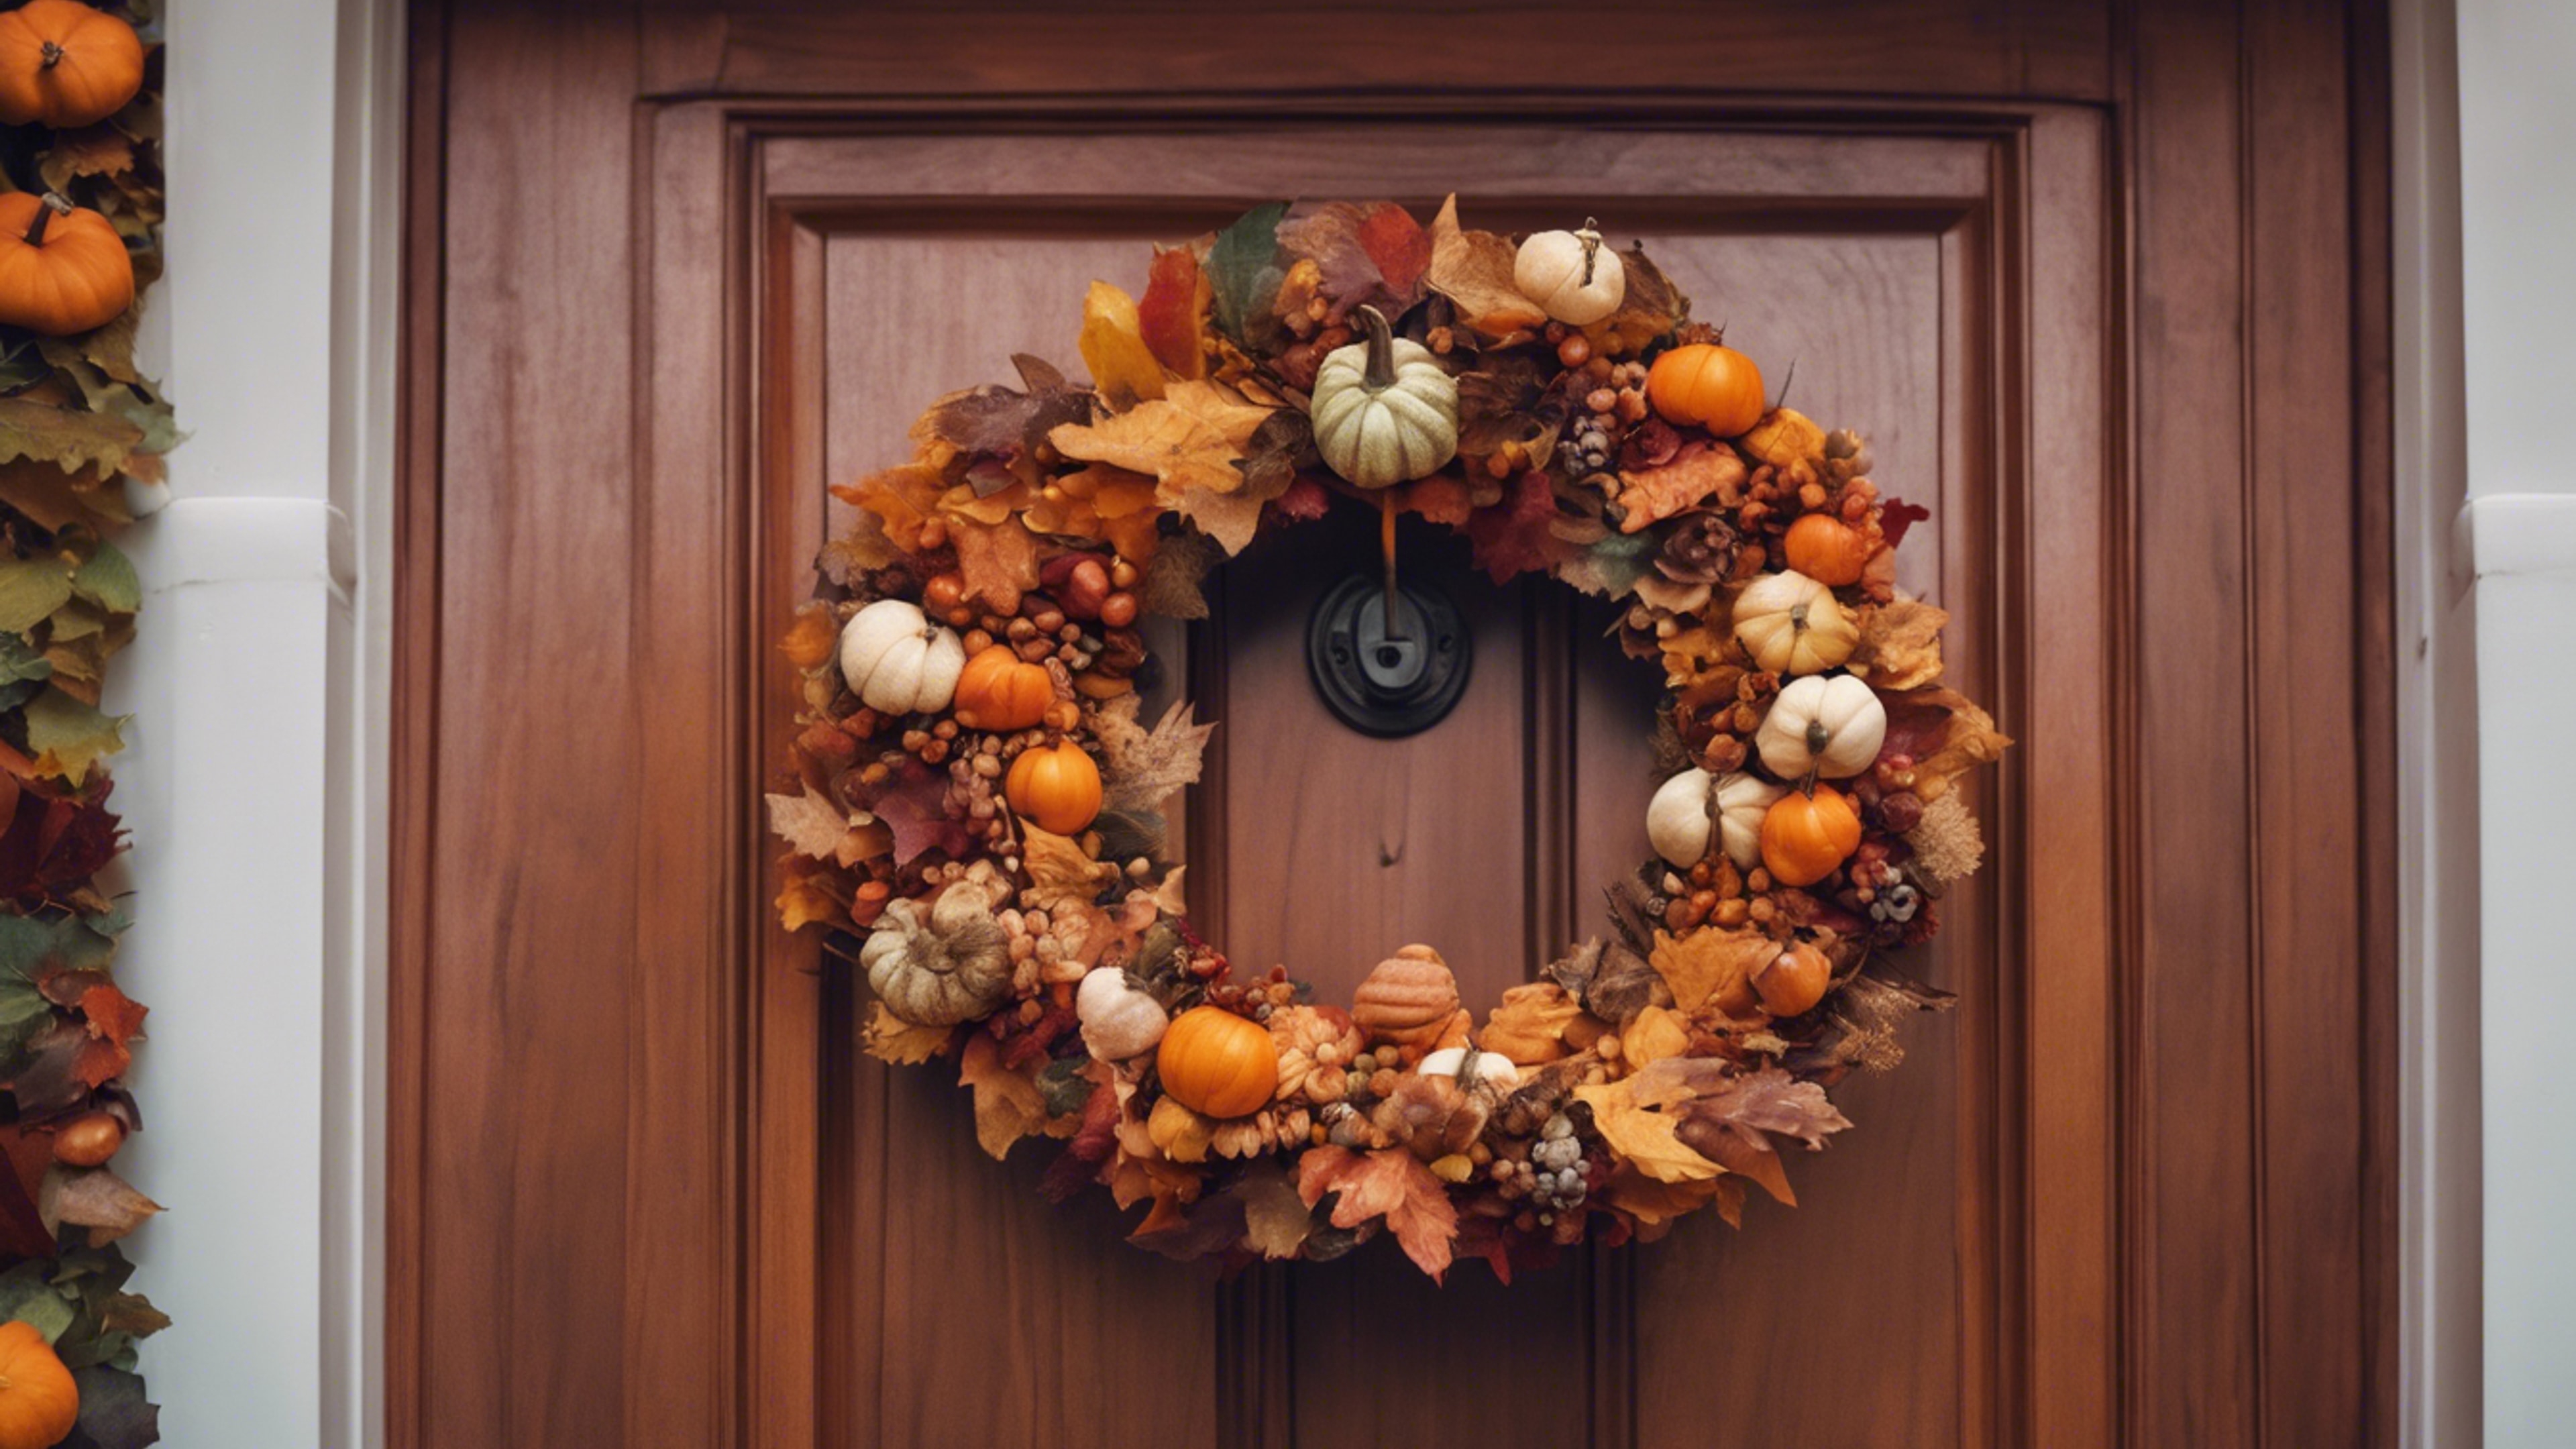 A festive autumn wreath made of colorful fall leaves and miniature pumpkins hanging elegantly on a mahogany door, signaling the start of the Thanksgiving holiday. Обои[f1a39b05ecd5476686a3]